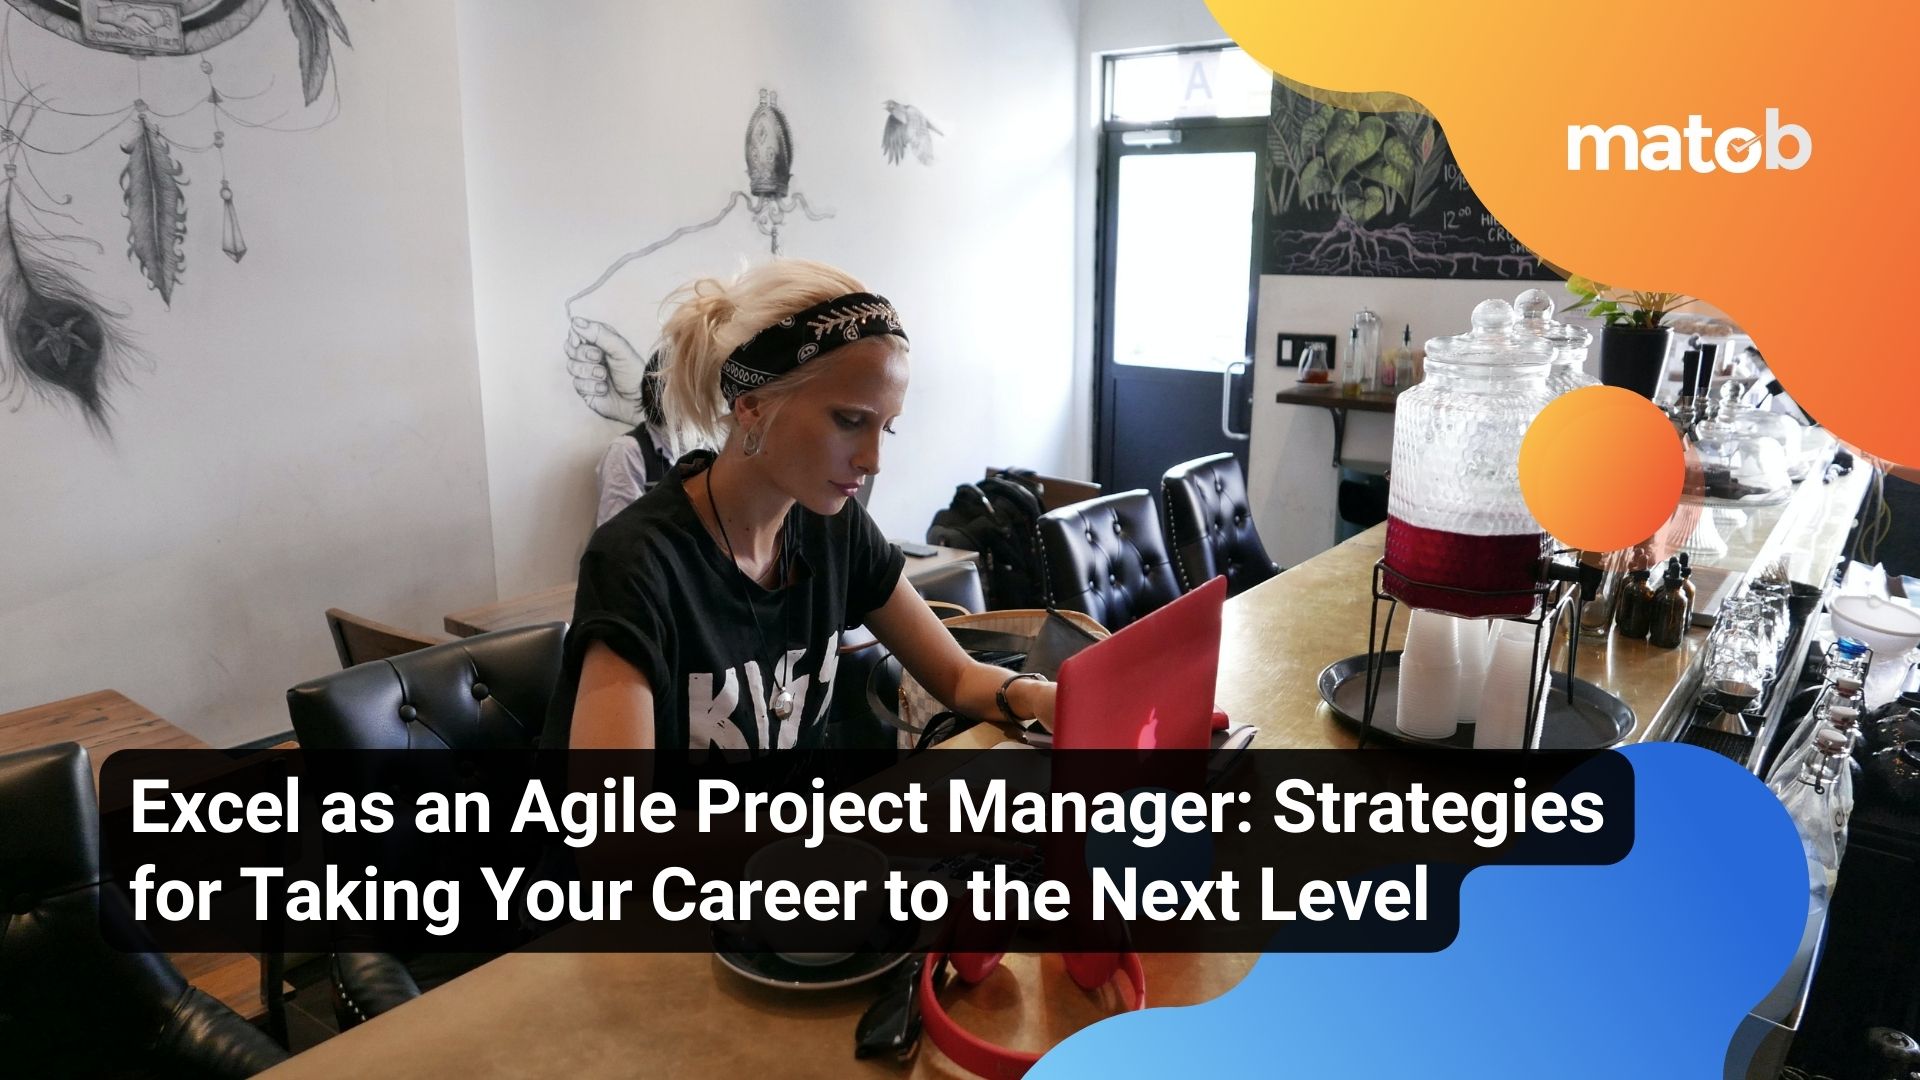 Excel as an Agile Project Manager: Strategies for Taking Your Career to the Next Level